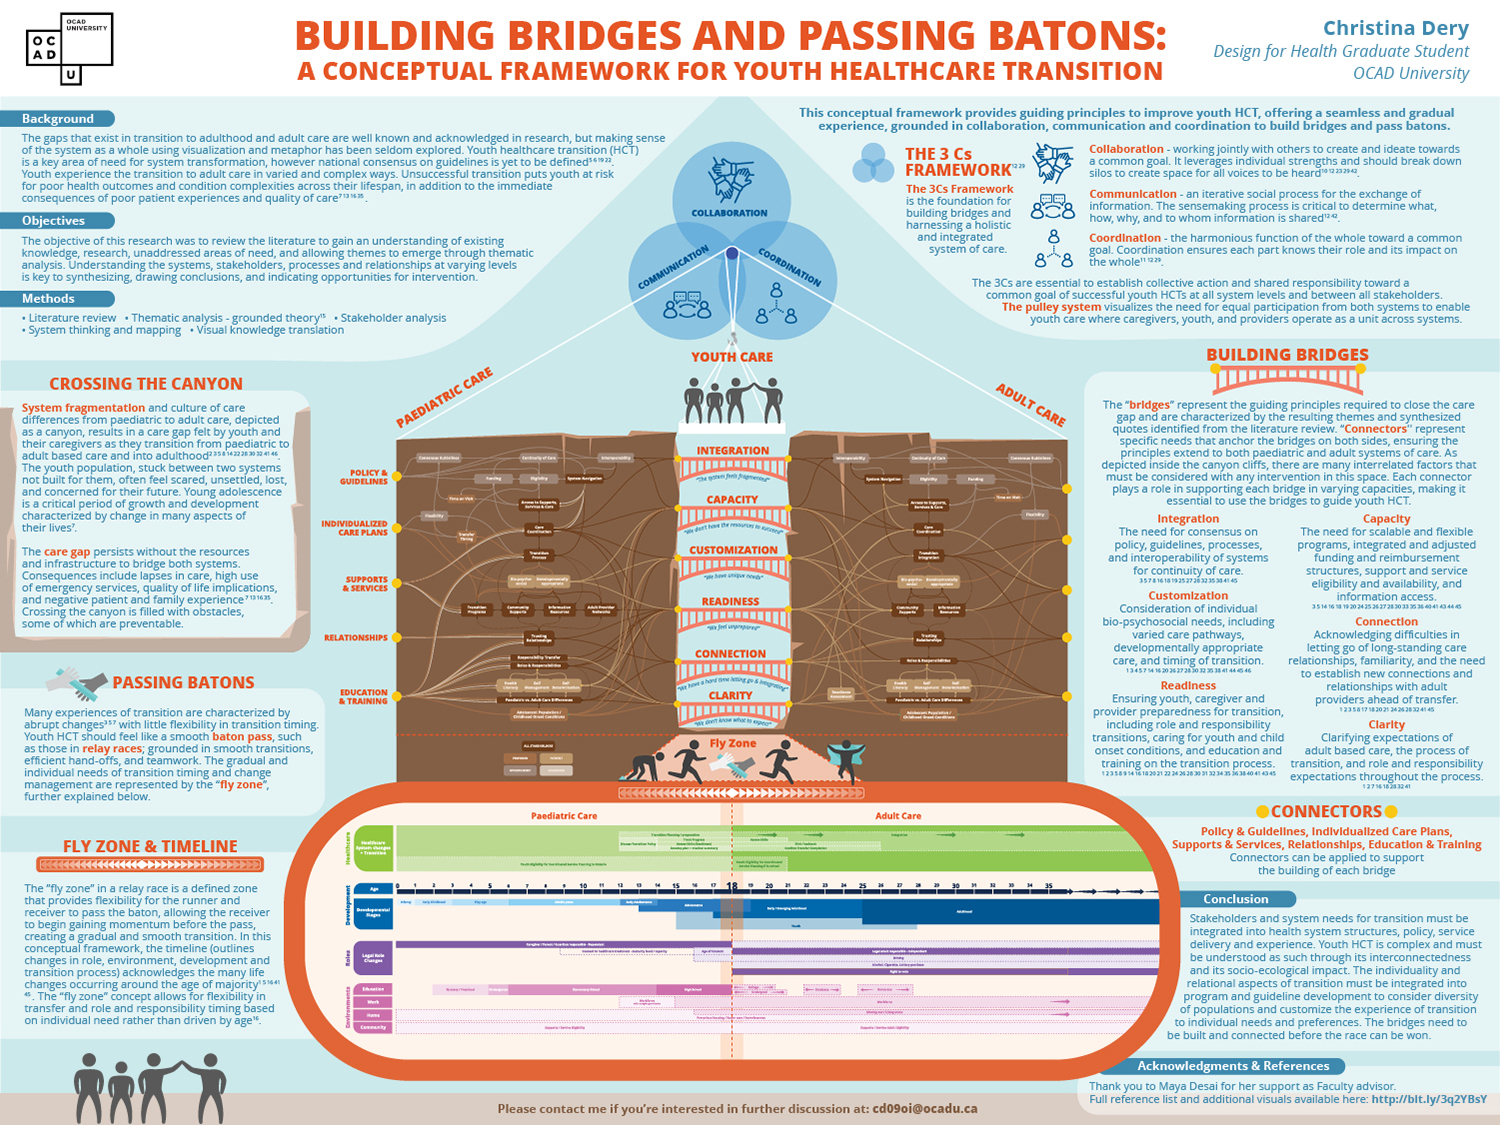 Building Bridges and Passing Batons: A conceptual Framework for Youth Healthcare Transition